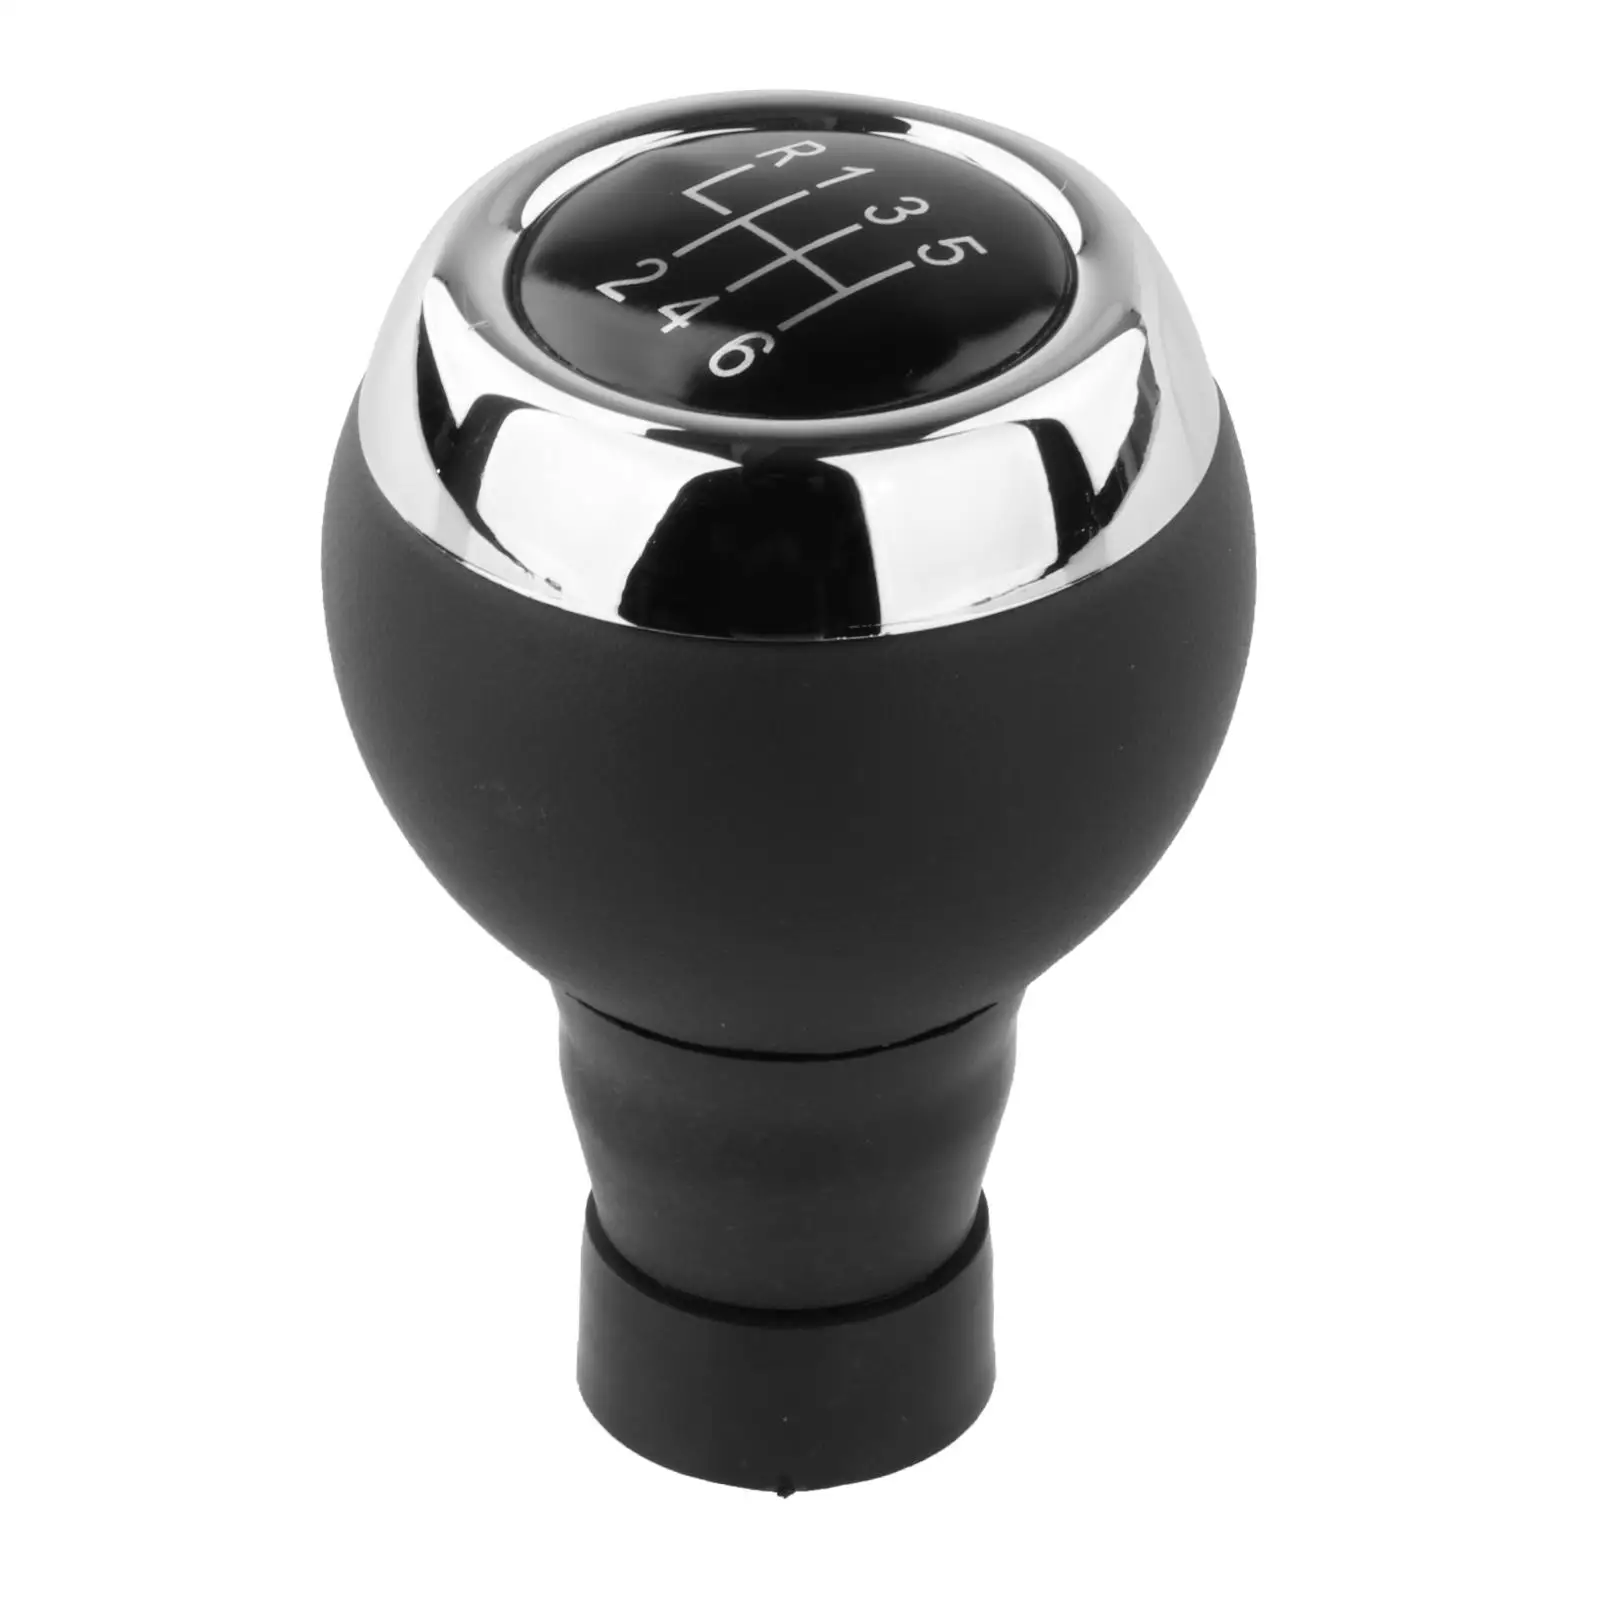 Gear Shift Knob Head Manual Fit for BMW Mini Accessories Easy to Install